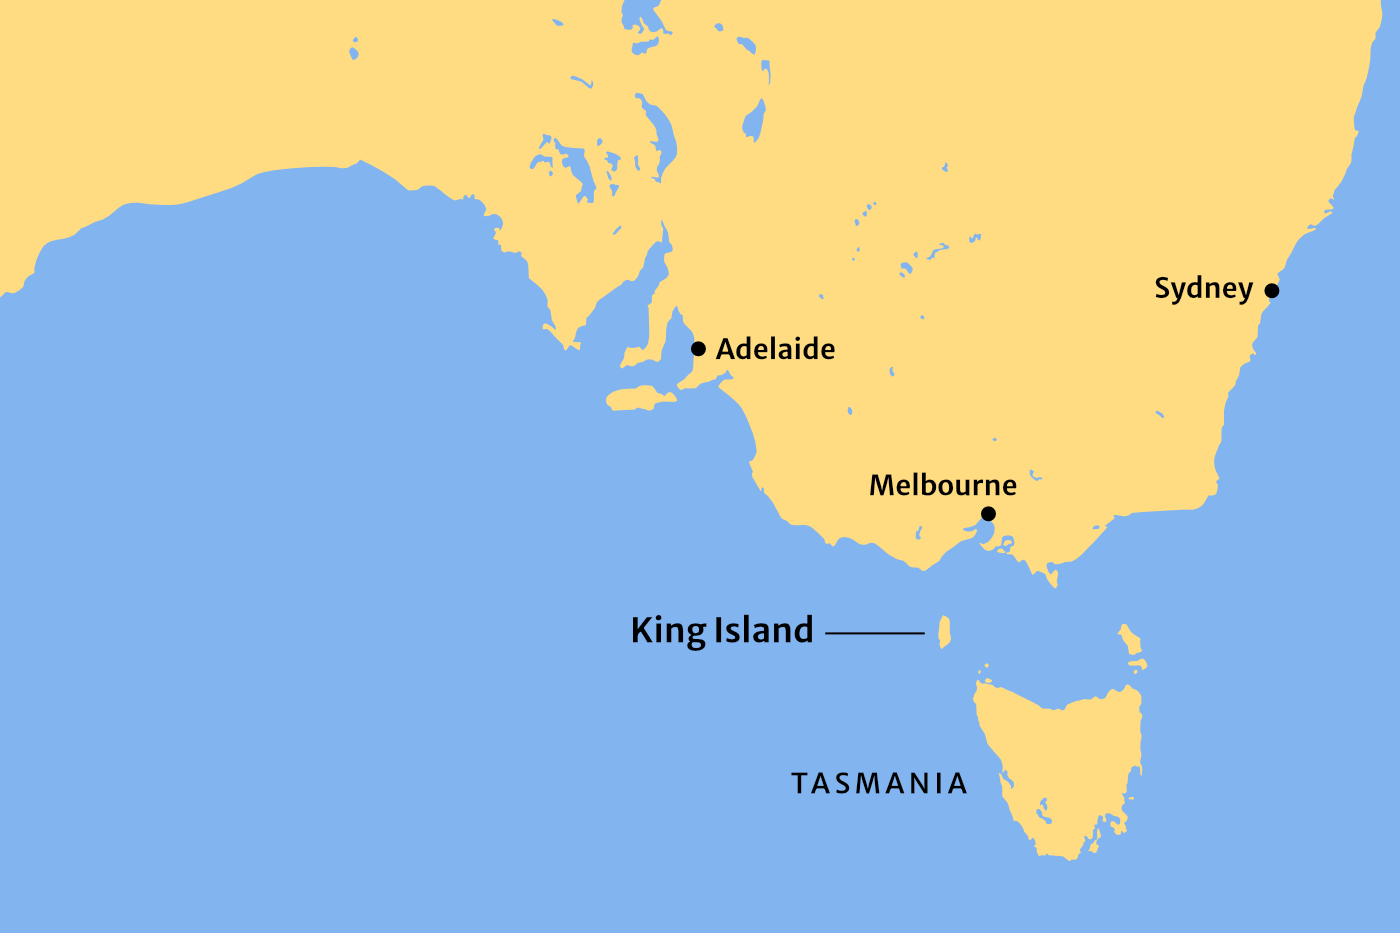 Map of southeastern Australia, showing Tasmania off the south coast and King Island between.